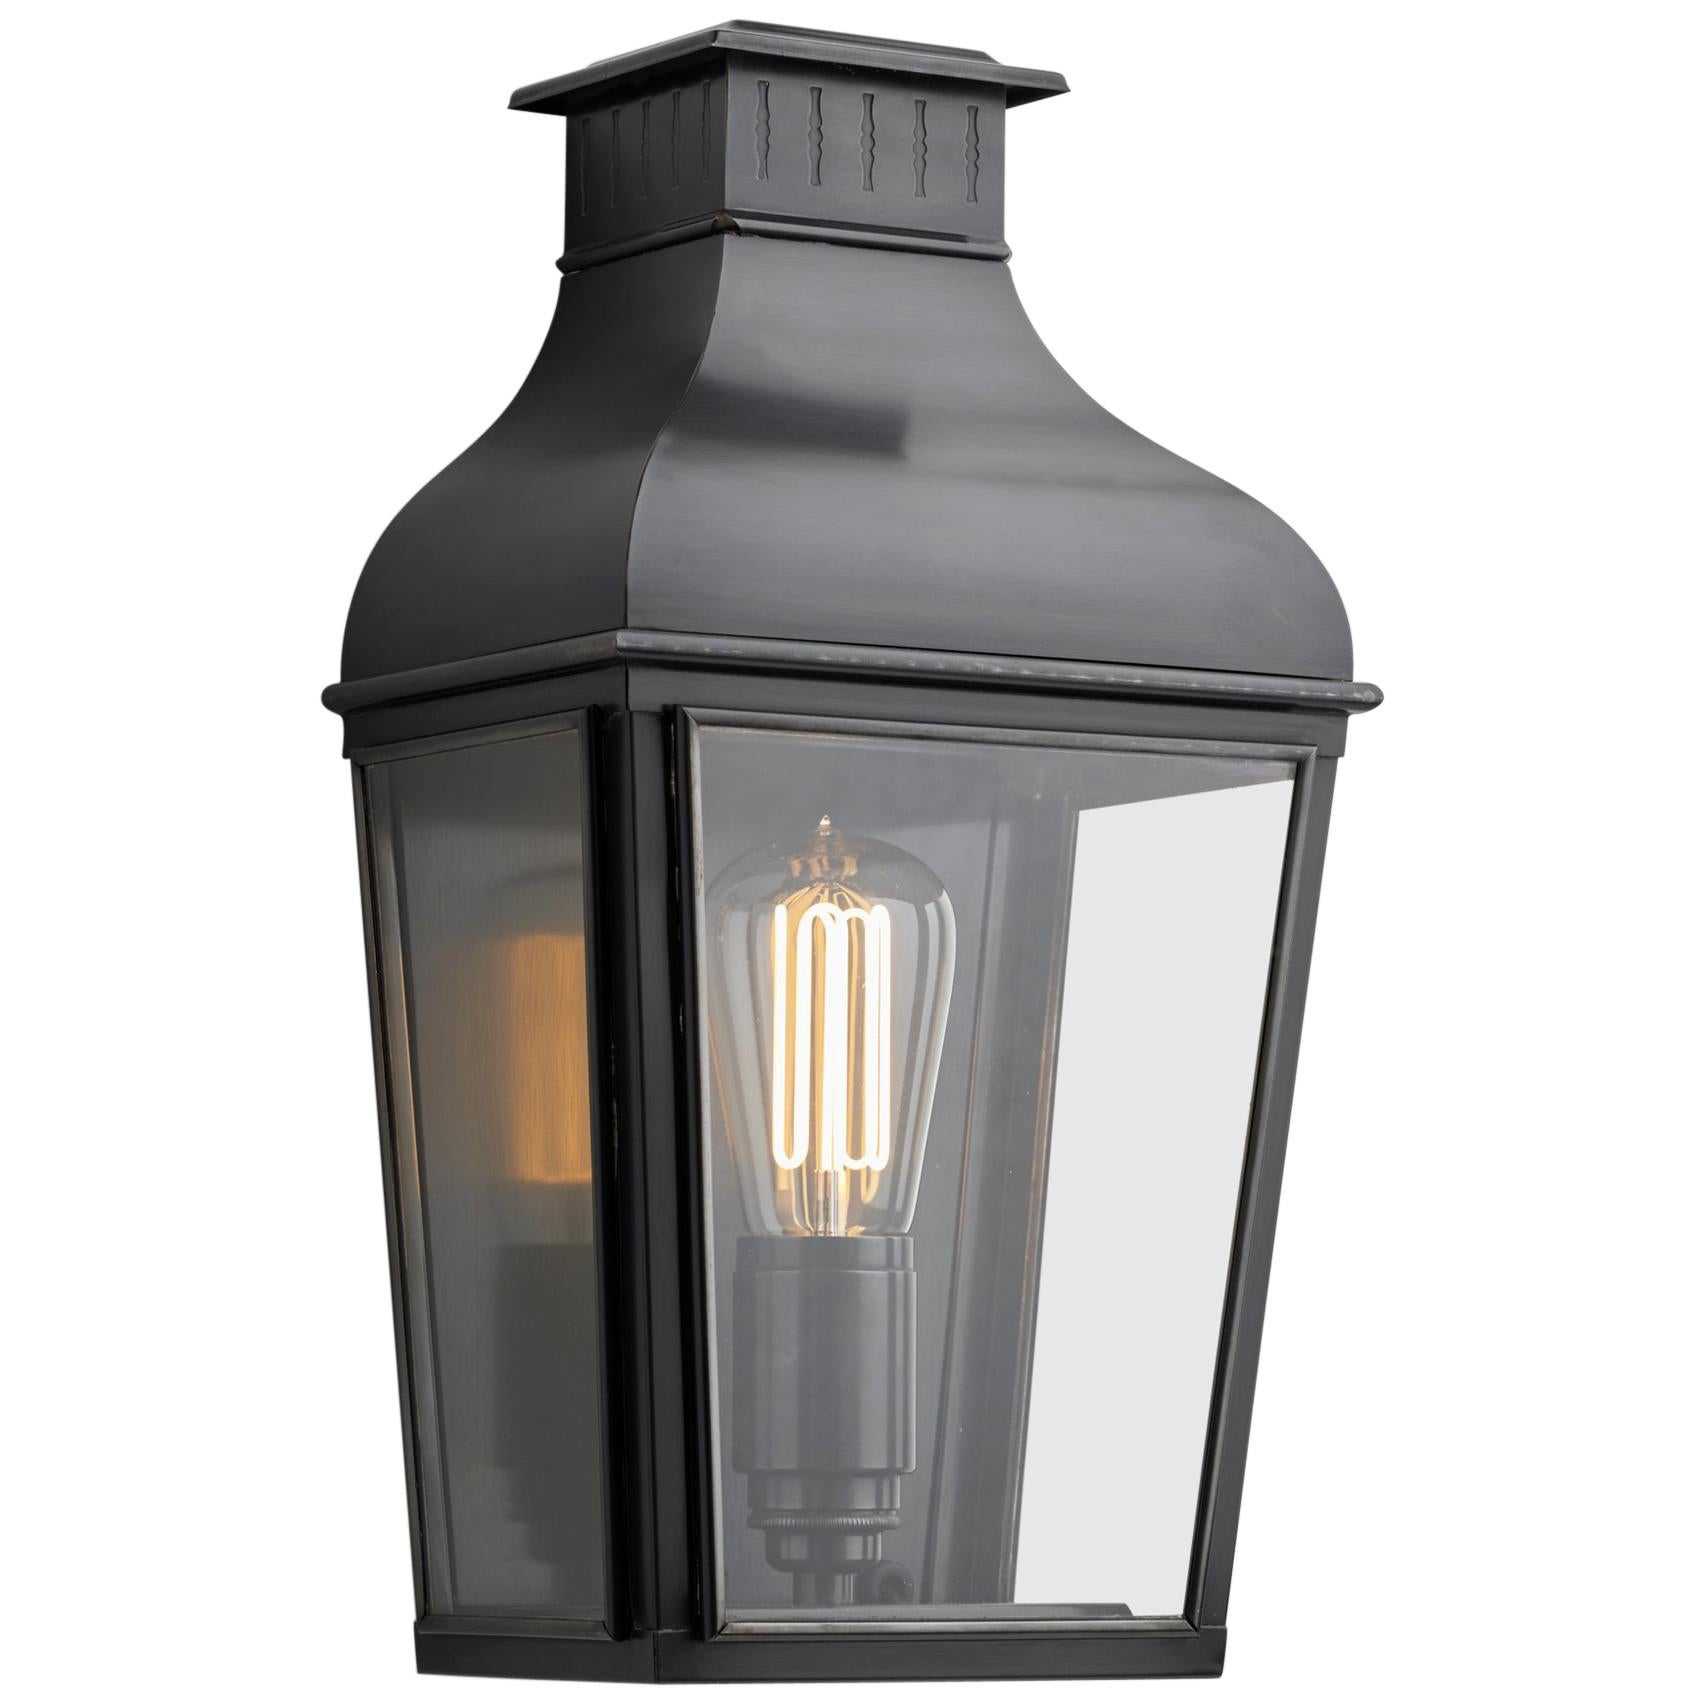 Tekna Montrose City Small-C Wall Light with Dark Bronze Finish and Clear Glass For Sale